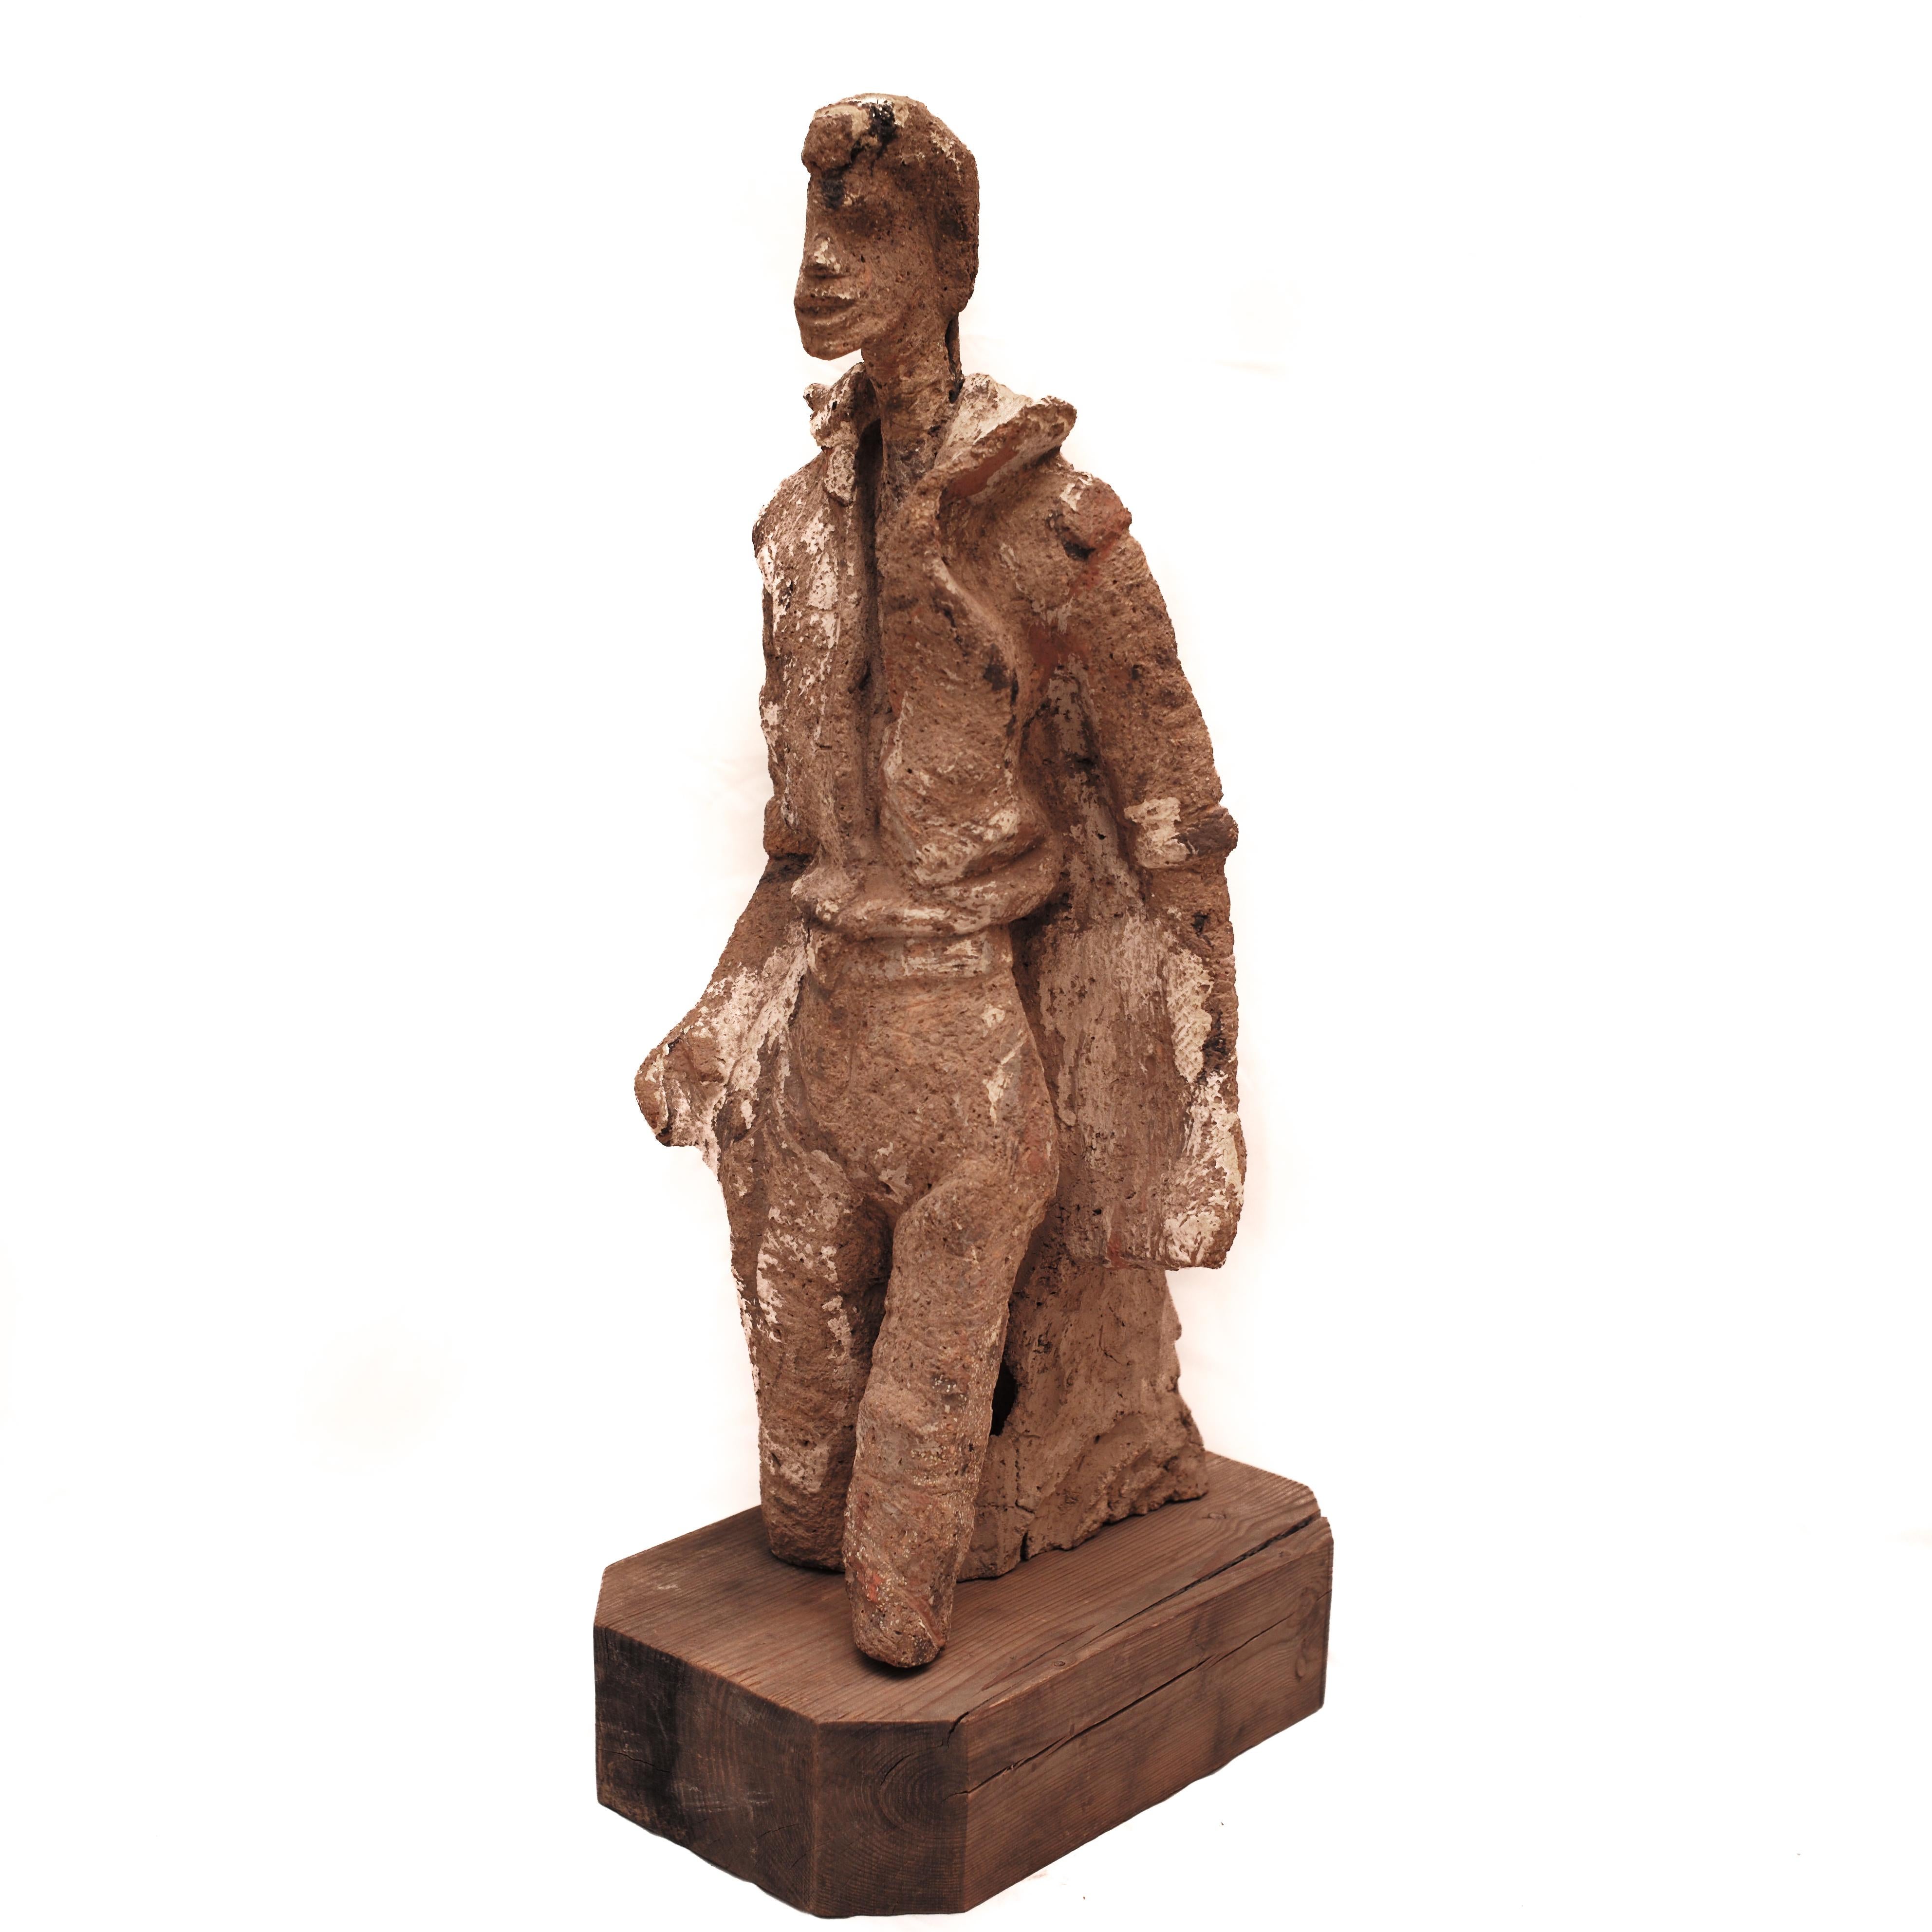 For sale: A captivating terracotta sculpture from the esteemed Swedish artist Evert Lindfors (1927-2016), crafted in the 1970s. A connoisseur of fine arts, Lindfors honed his craft at the prestigious École des Beaux-Arts in Paris during the 1940s.